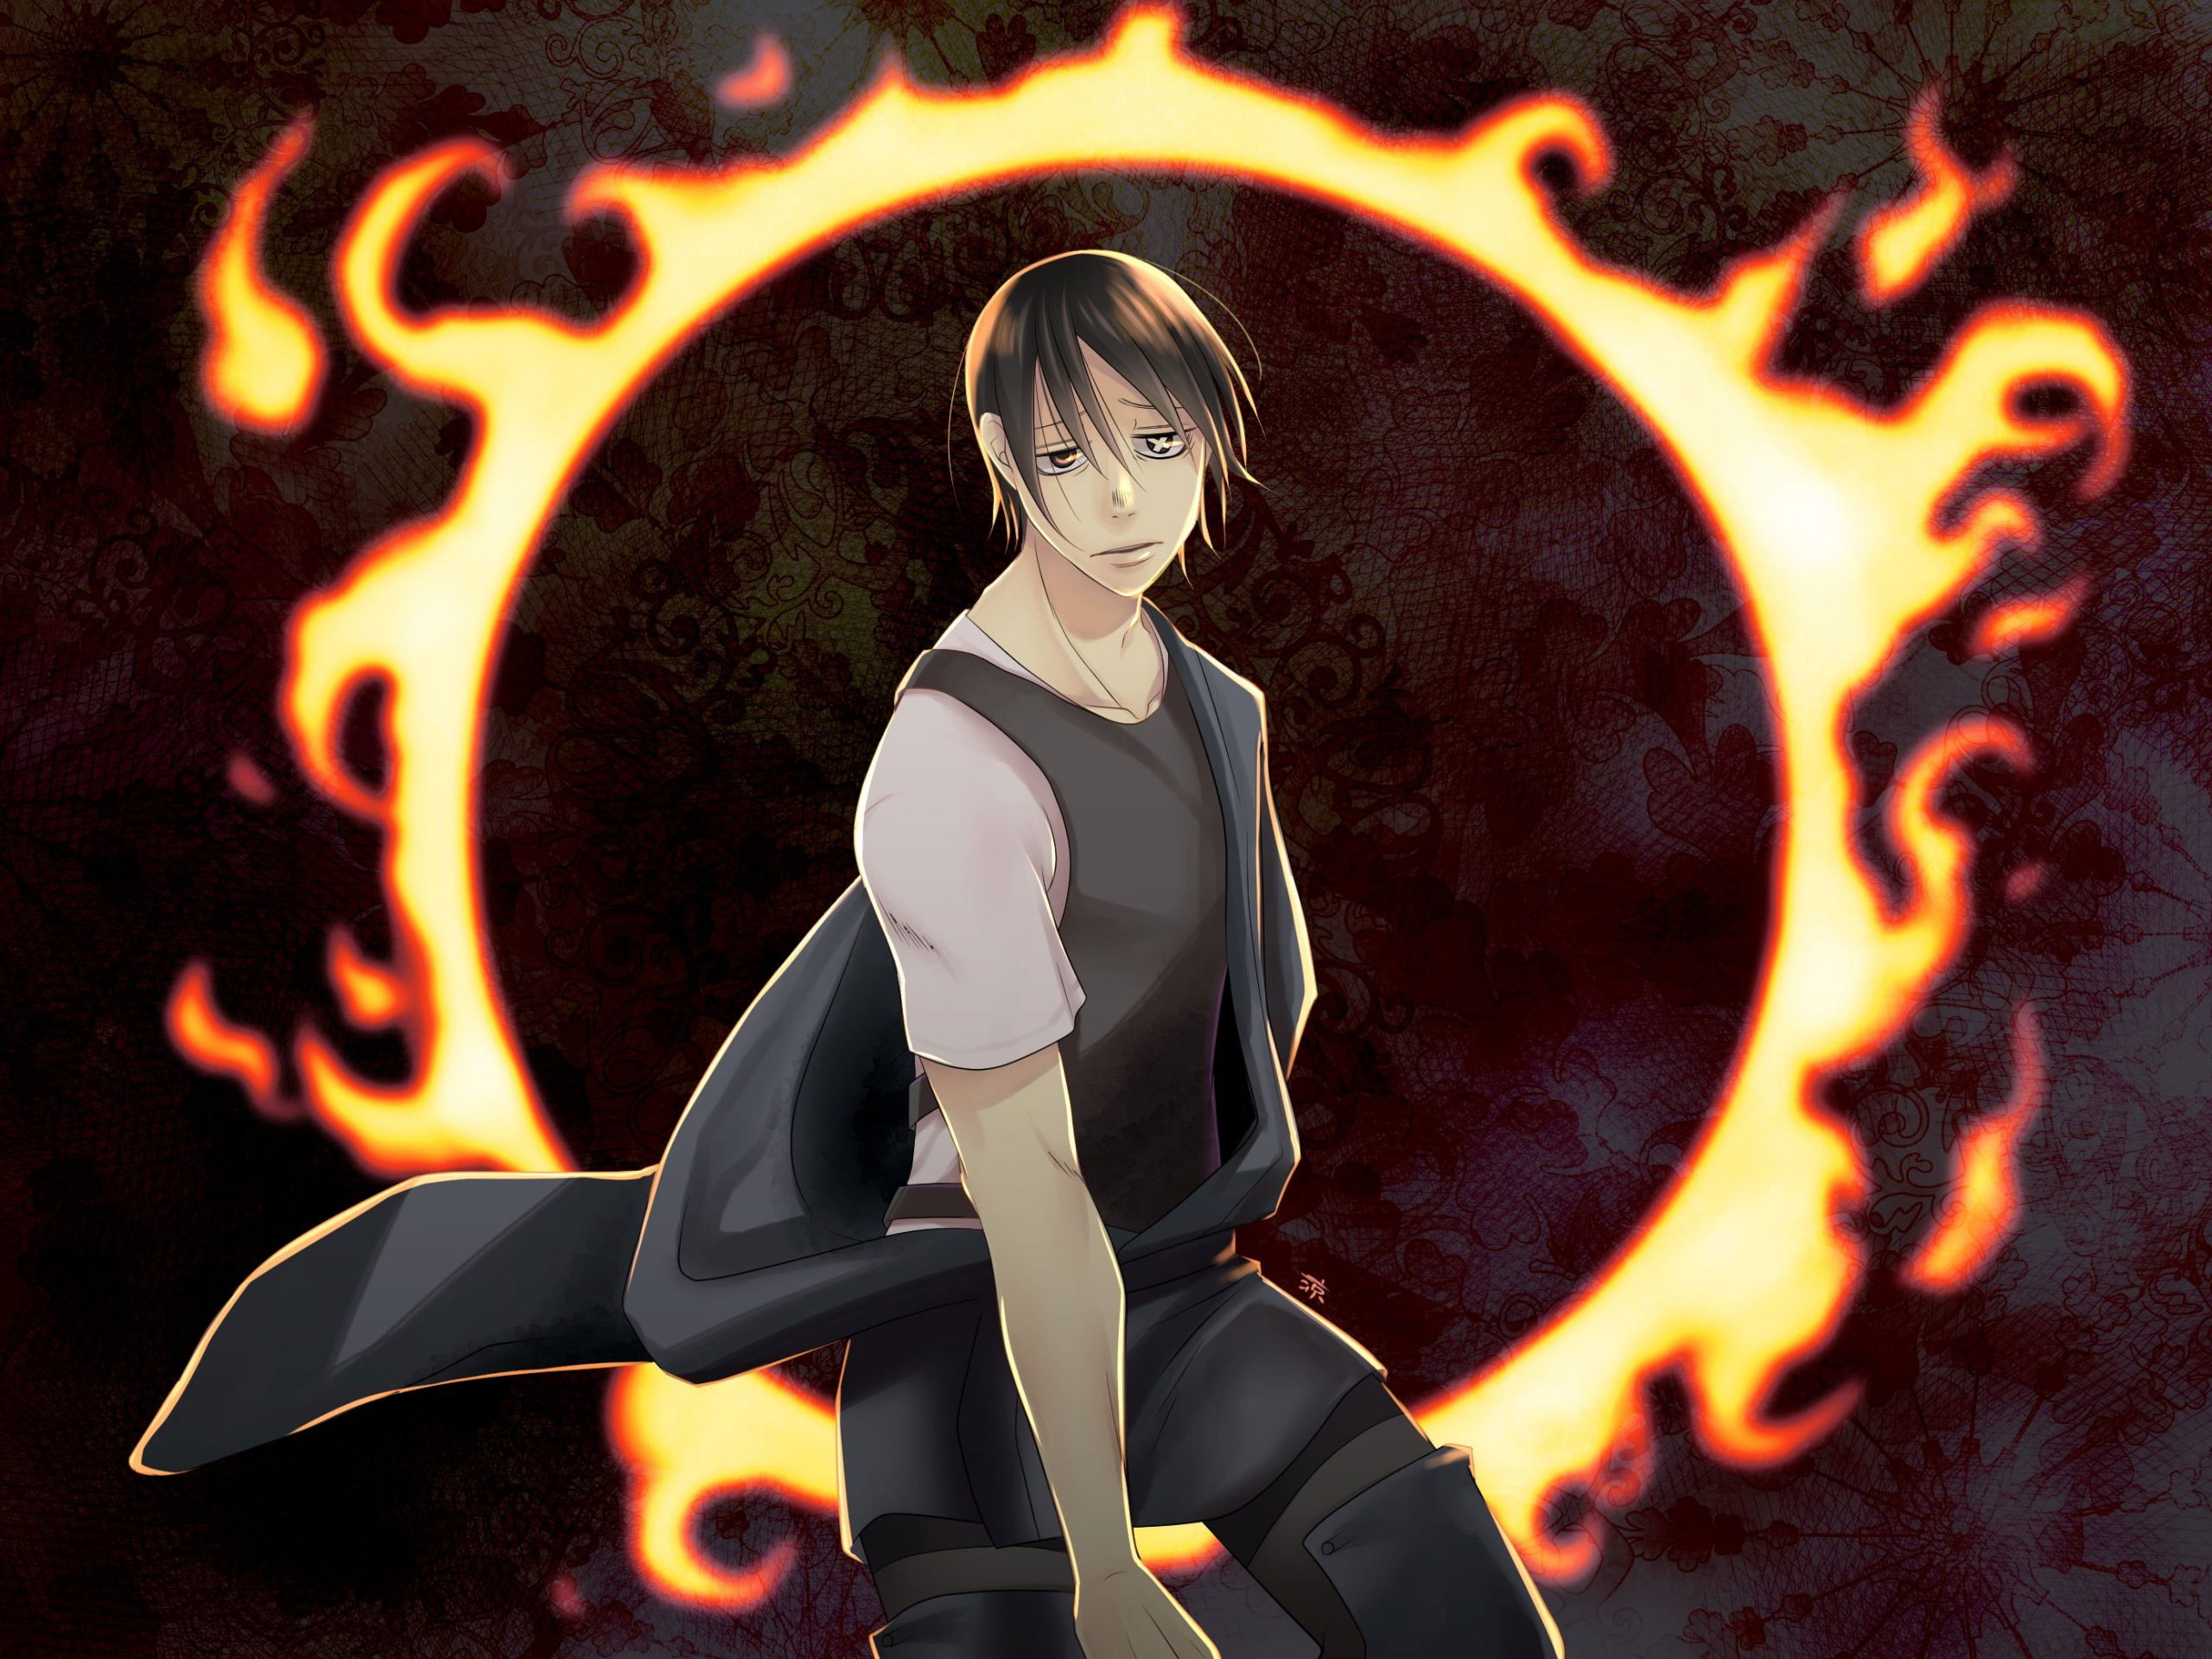 Share 88+ about fire force wallpaper super cool .vn